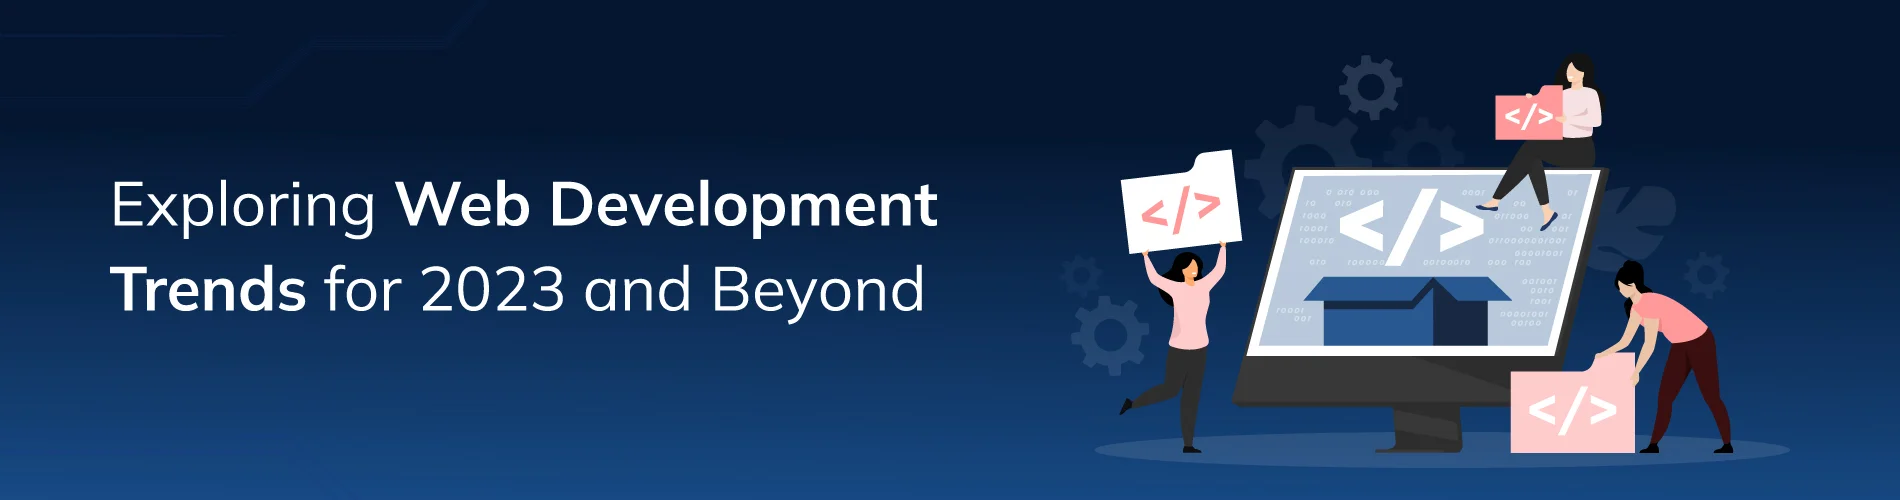 Exploring Web Development Trends for 2023 and Beyond